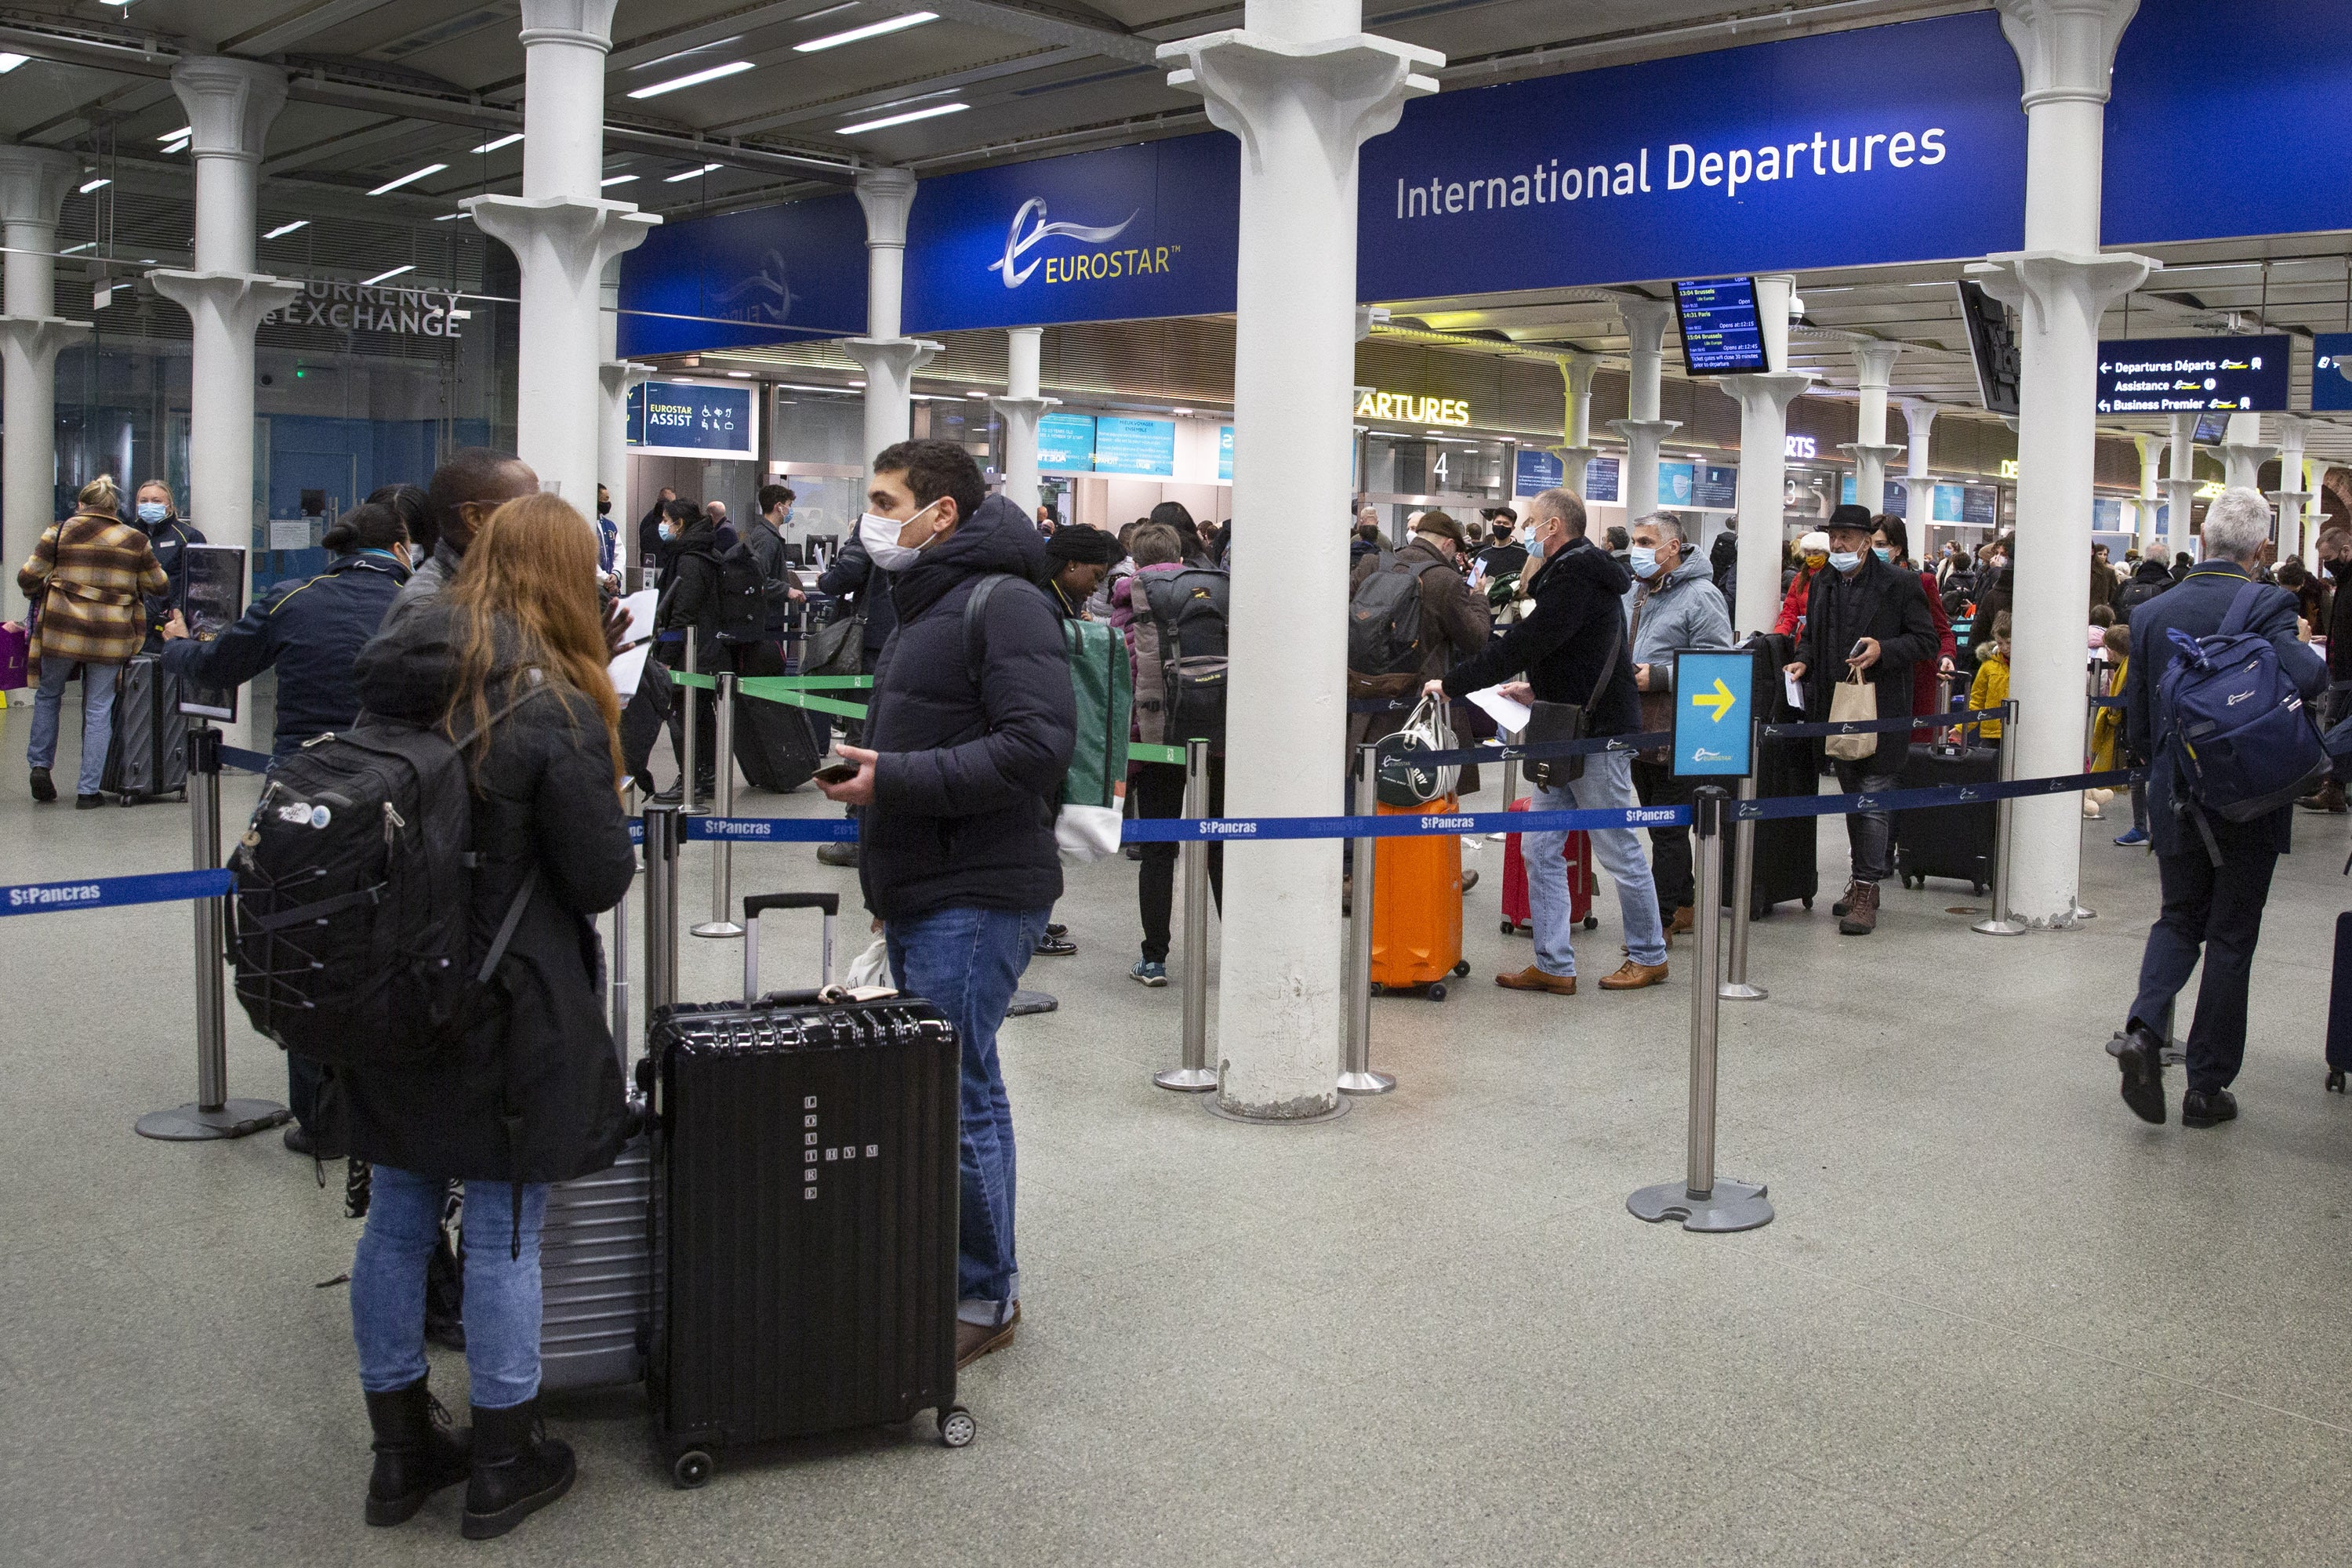 Eurostar urged people to avoid London St Pancras station unless they had a pre-booked ticket (Joshua Bratt/PA)